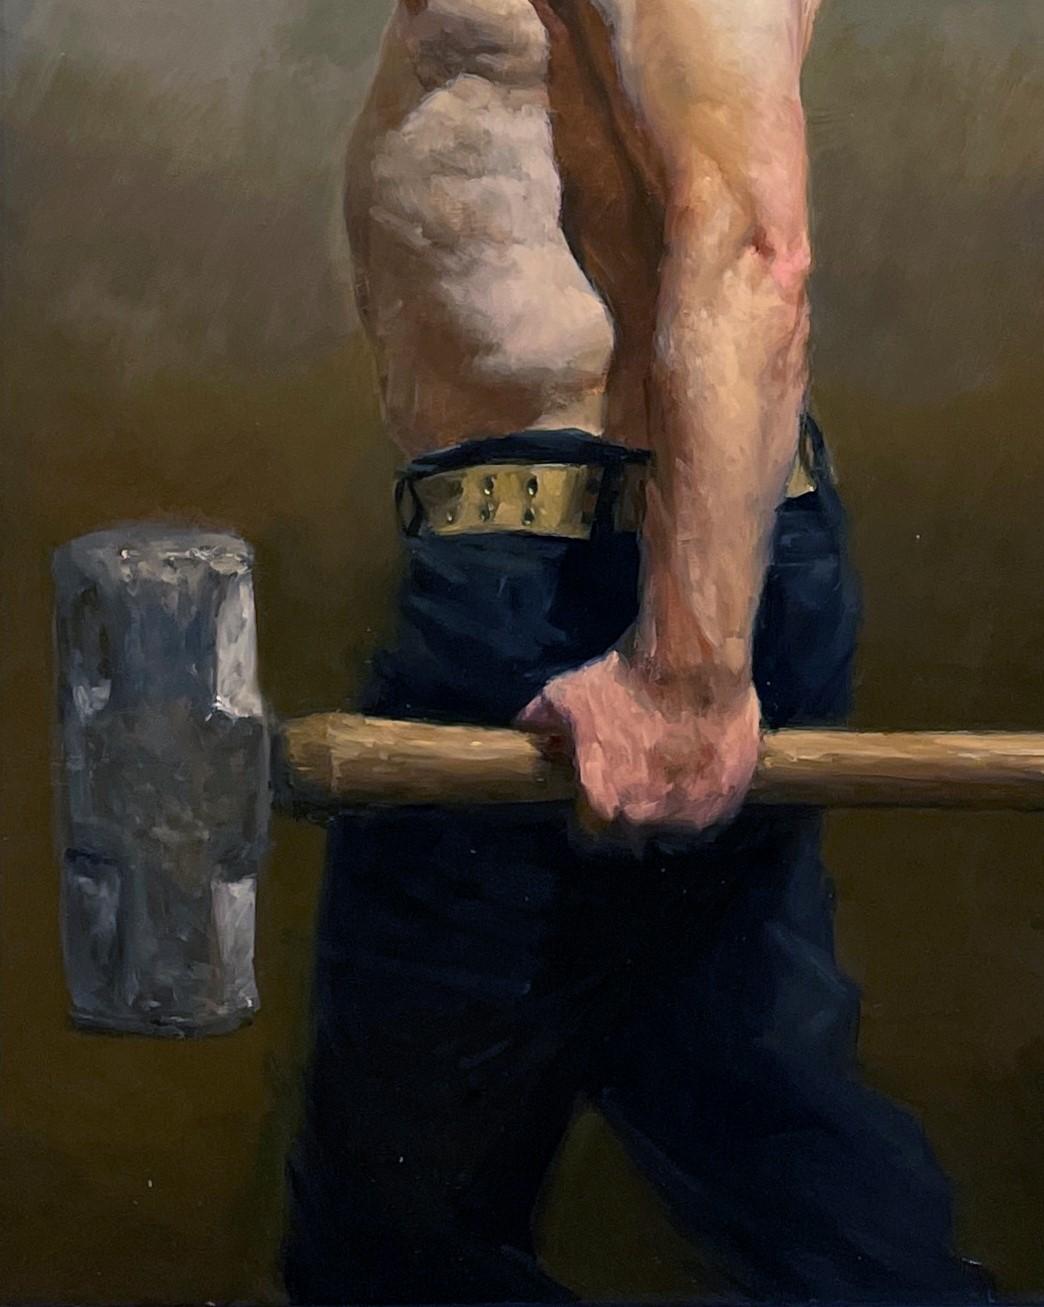 Sledge Bearers, Two Men Holding a Sledge Hammer, Original Oil on Panel - Black Figurative Painting by Zack Zdrale